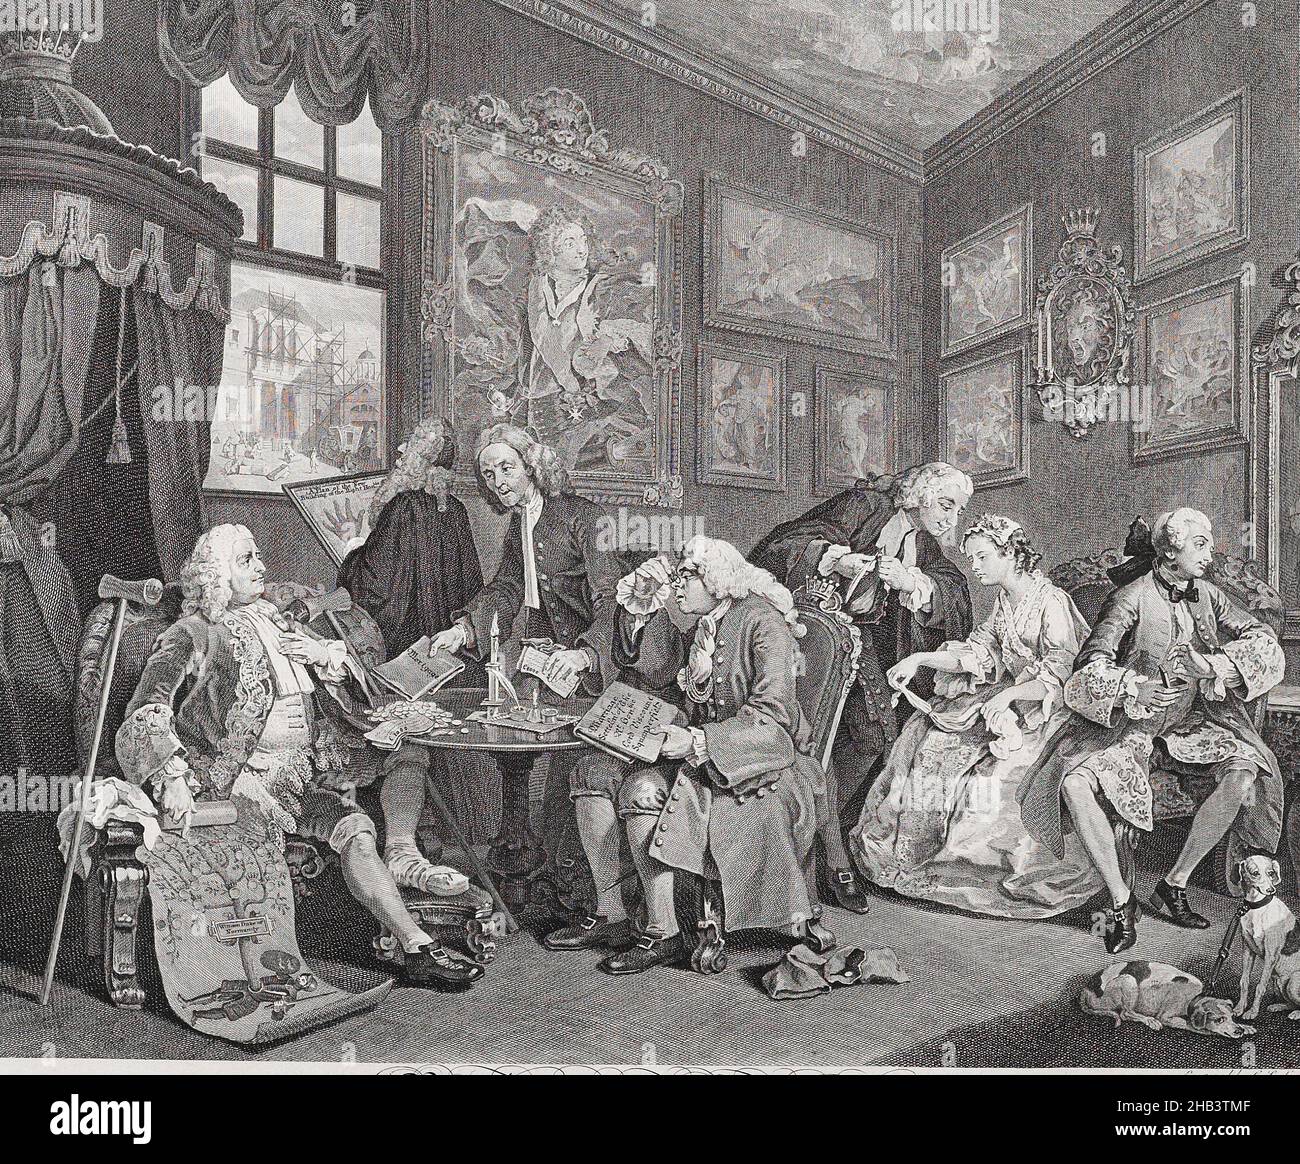 Marriage à-la-mode. Plate 1. The marriage settlement, William Hogarth, artist, 1745, Greater London, engraving, The first of a series of six engravings, based on paintings by William Hogarth (1743-45). The original paintings are in the National Gallery, London. Hogarth commissioned three French expatriate specialist engravers (in this print Louis Gerard Scotin), as they were the finest practitioners of the medium in mid-18th century London. Stock Photo